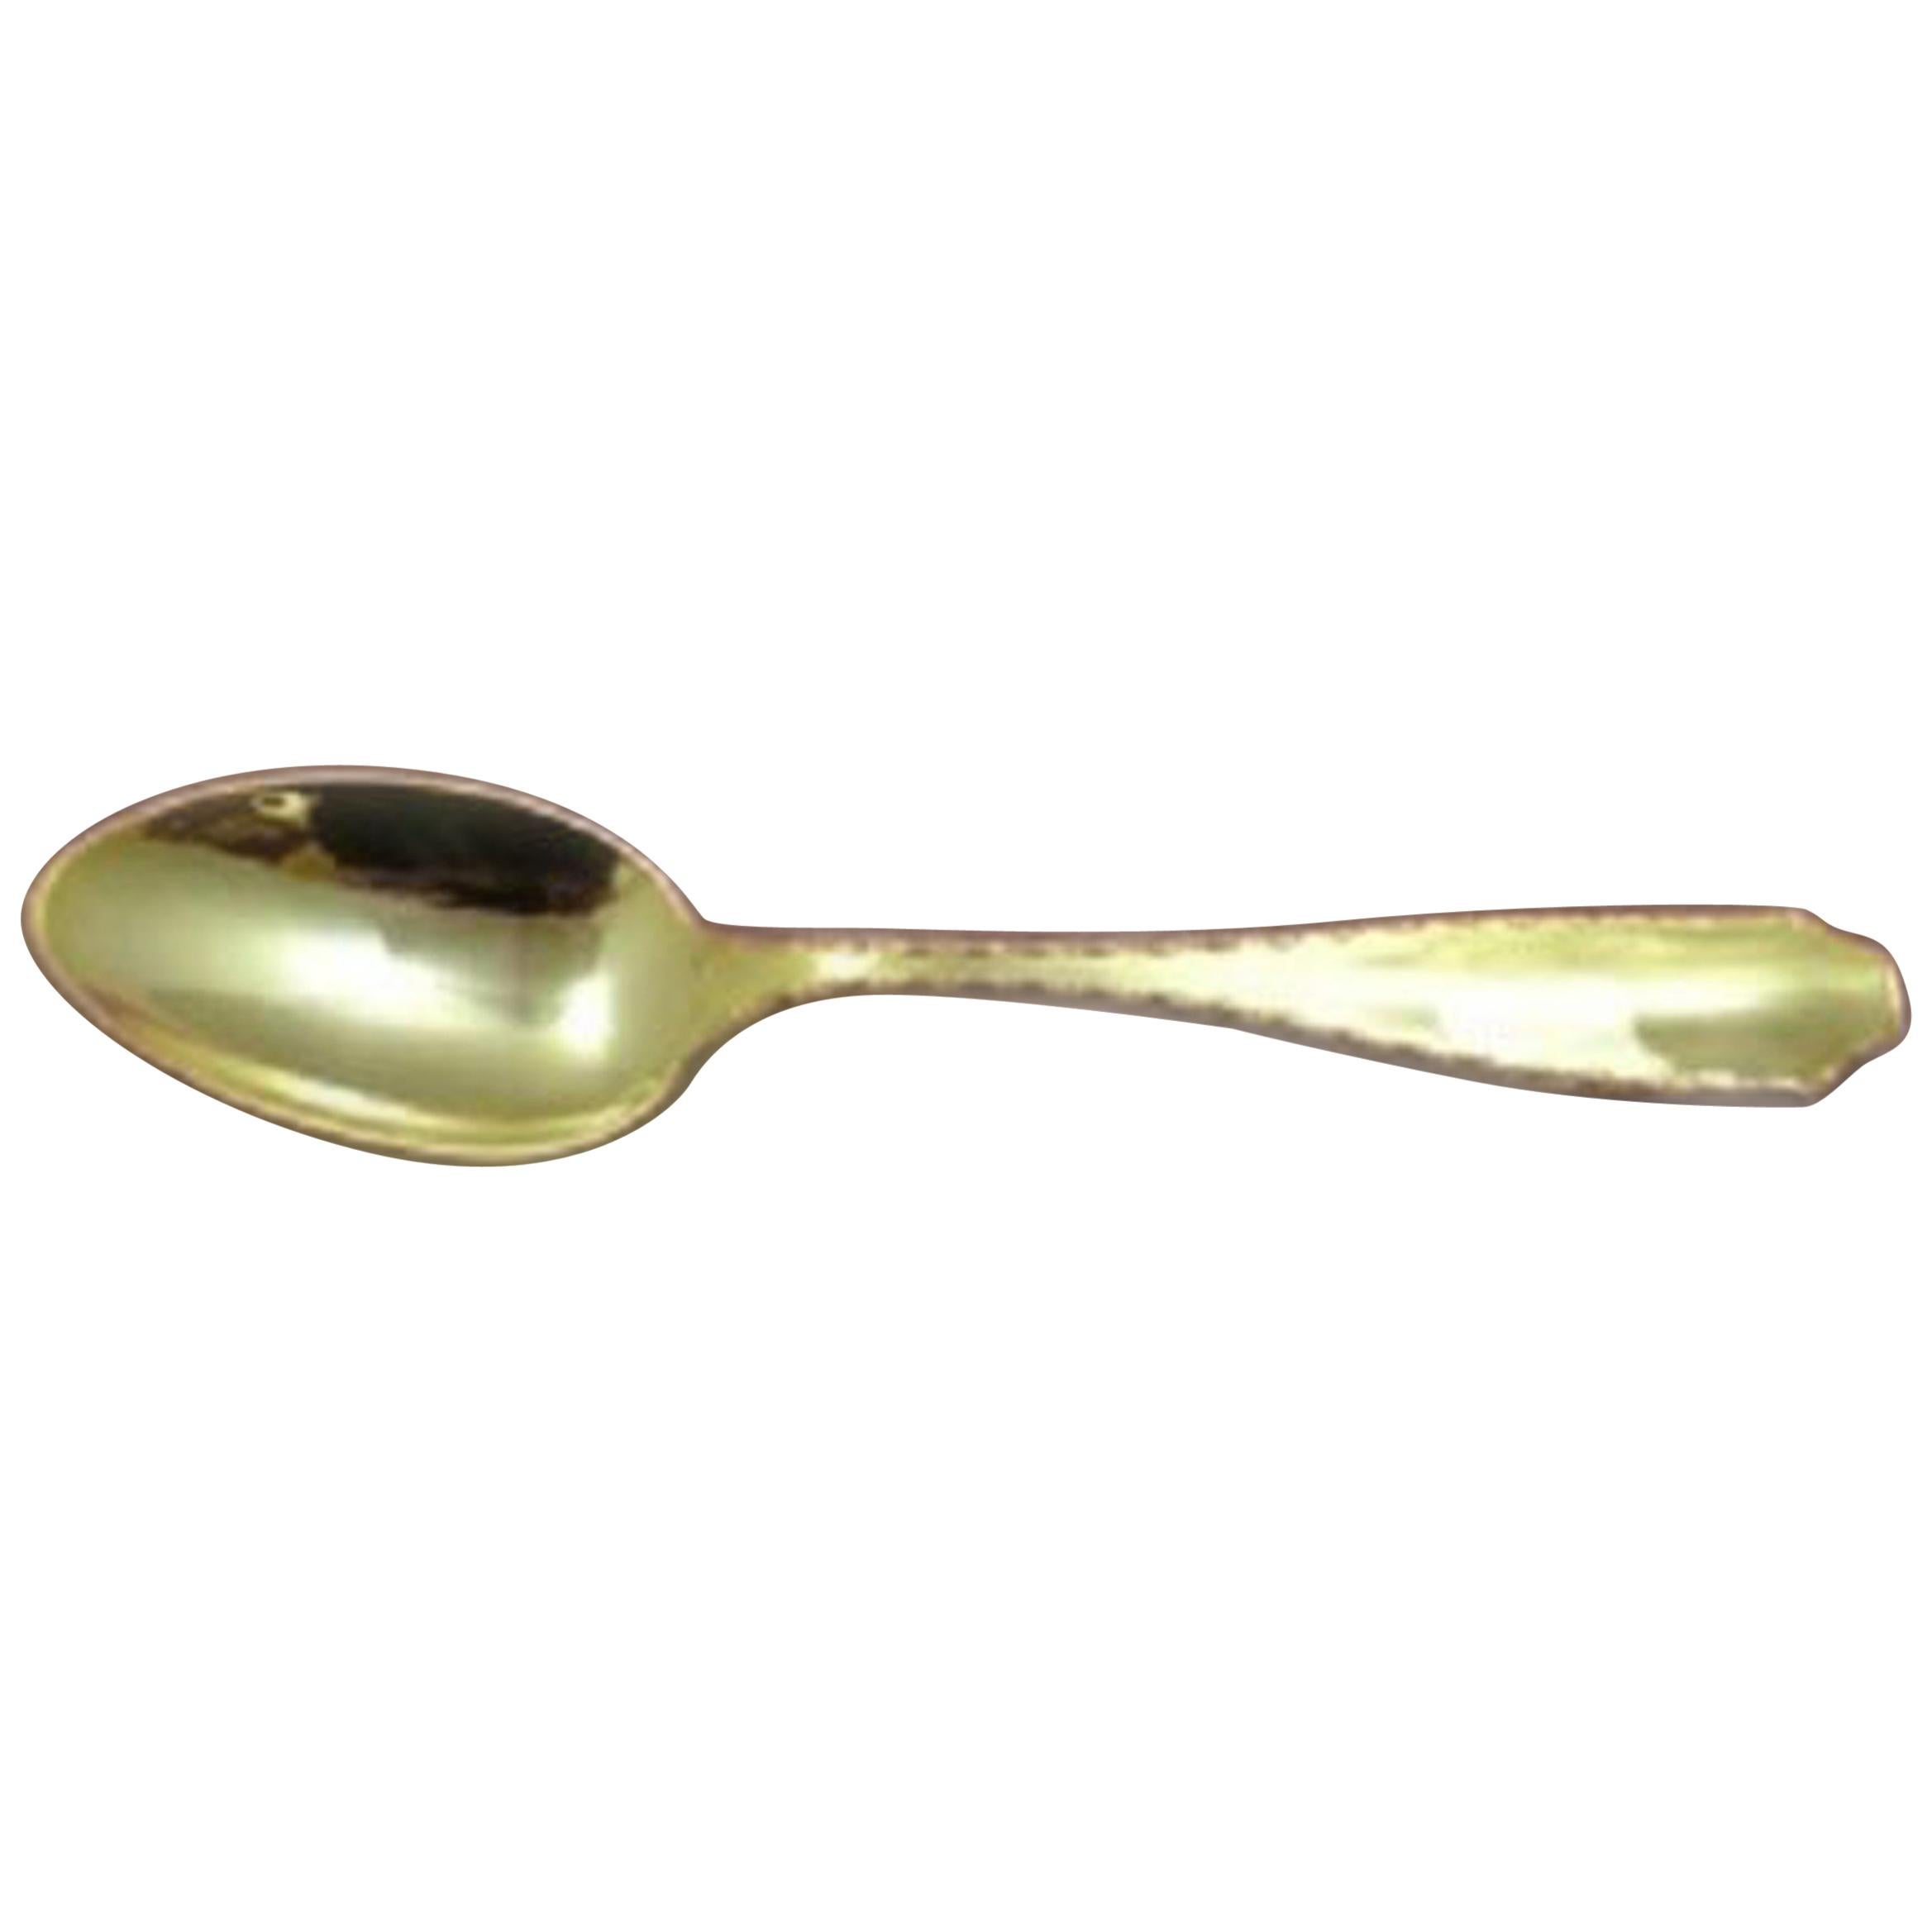 Marquise Vermeil 'Gold' by Tiffany & Co. Sterling Silver Teaspoon